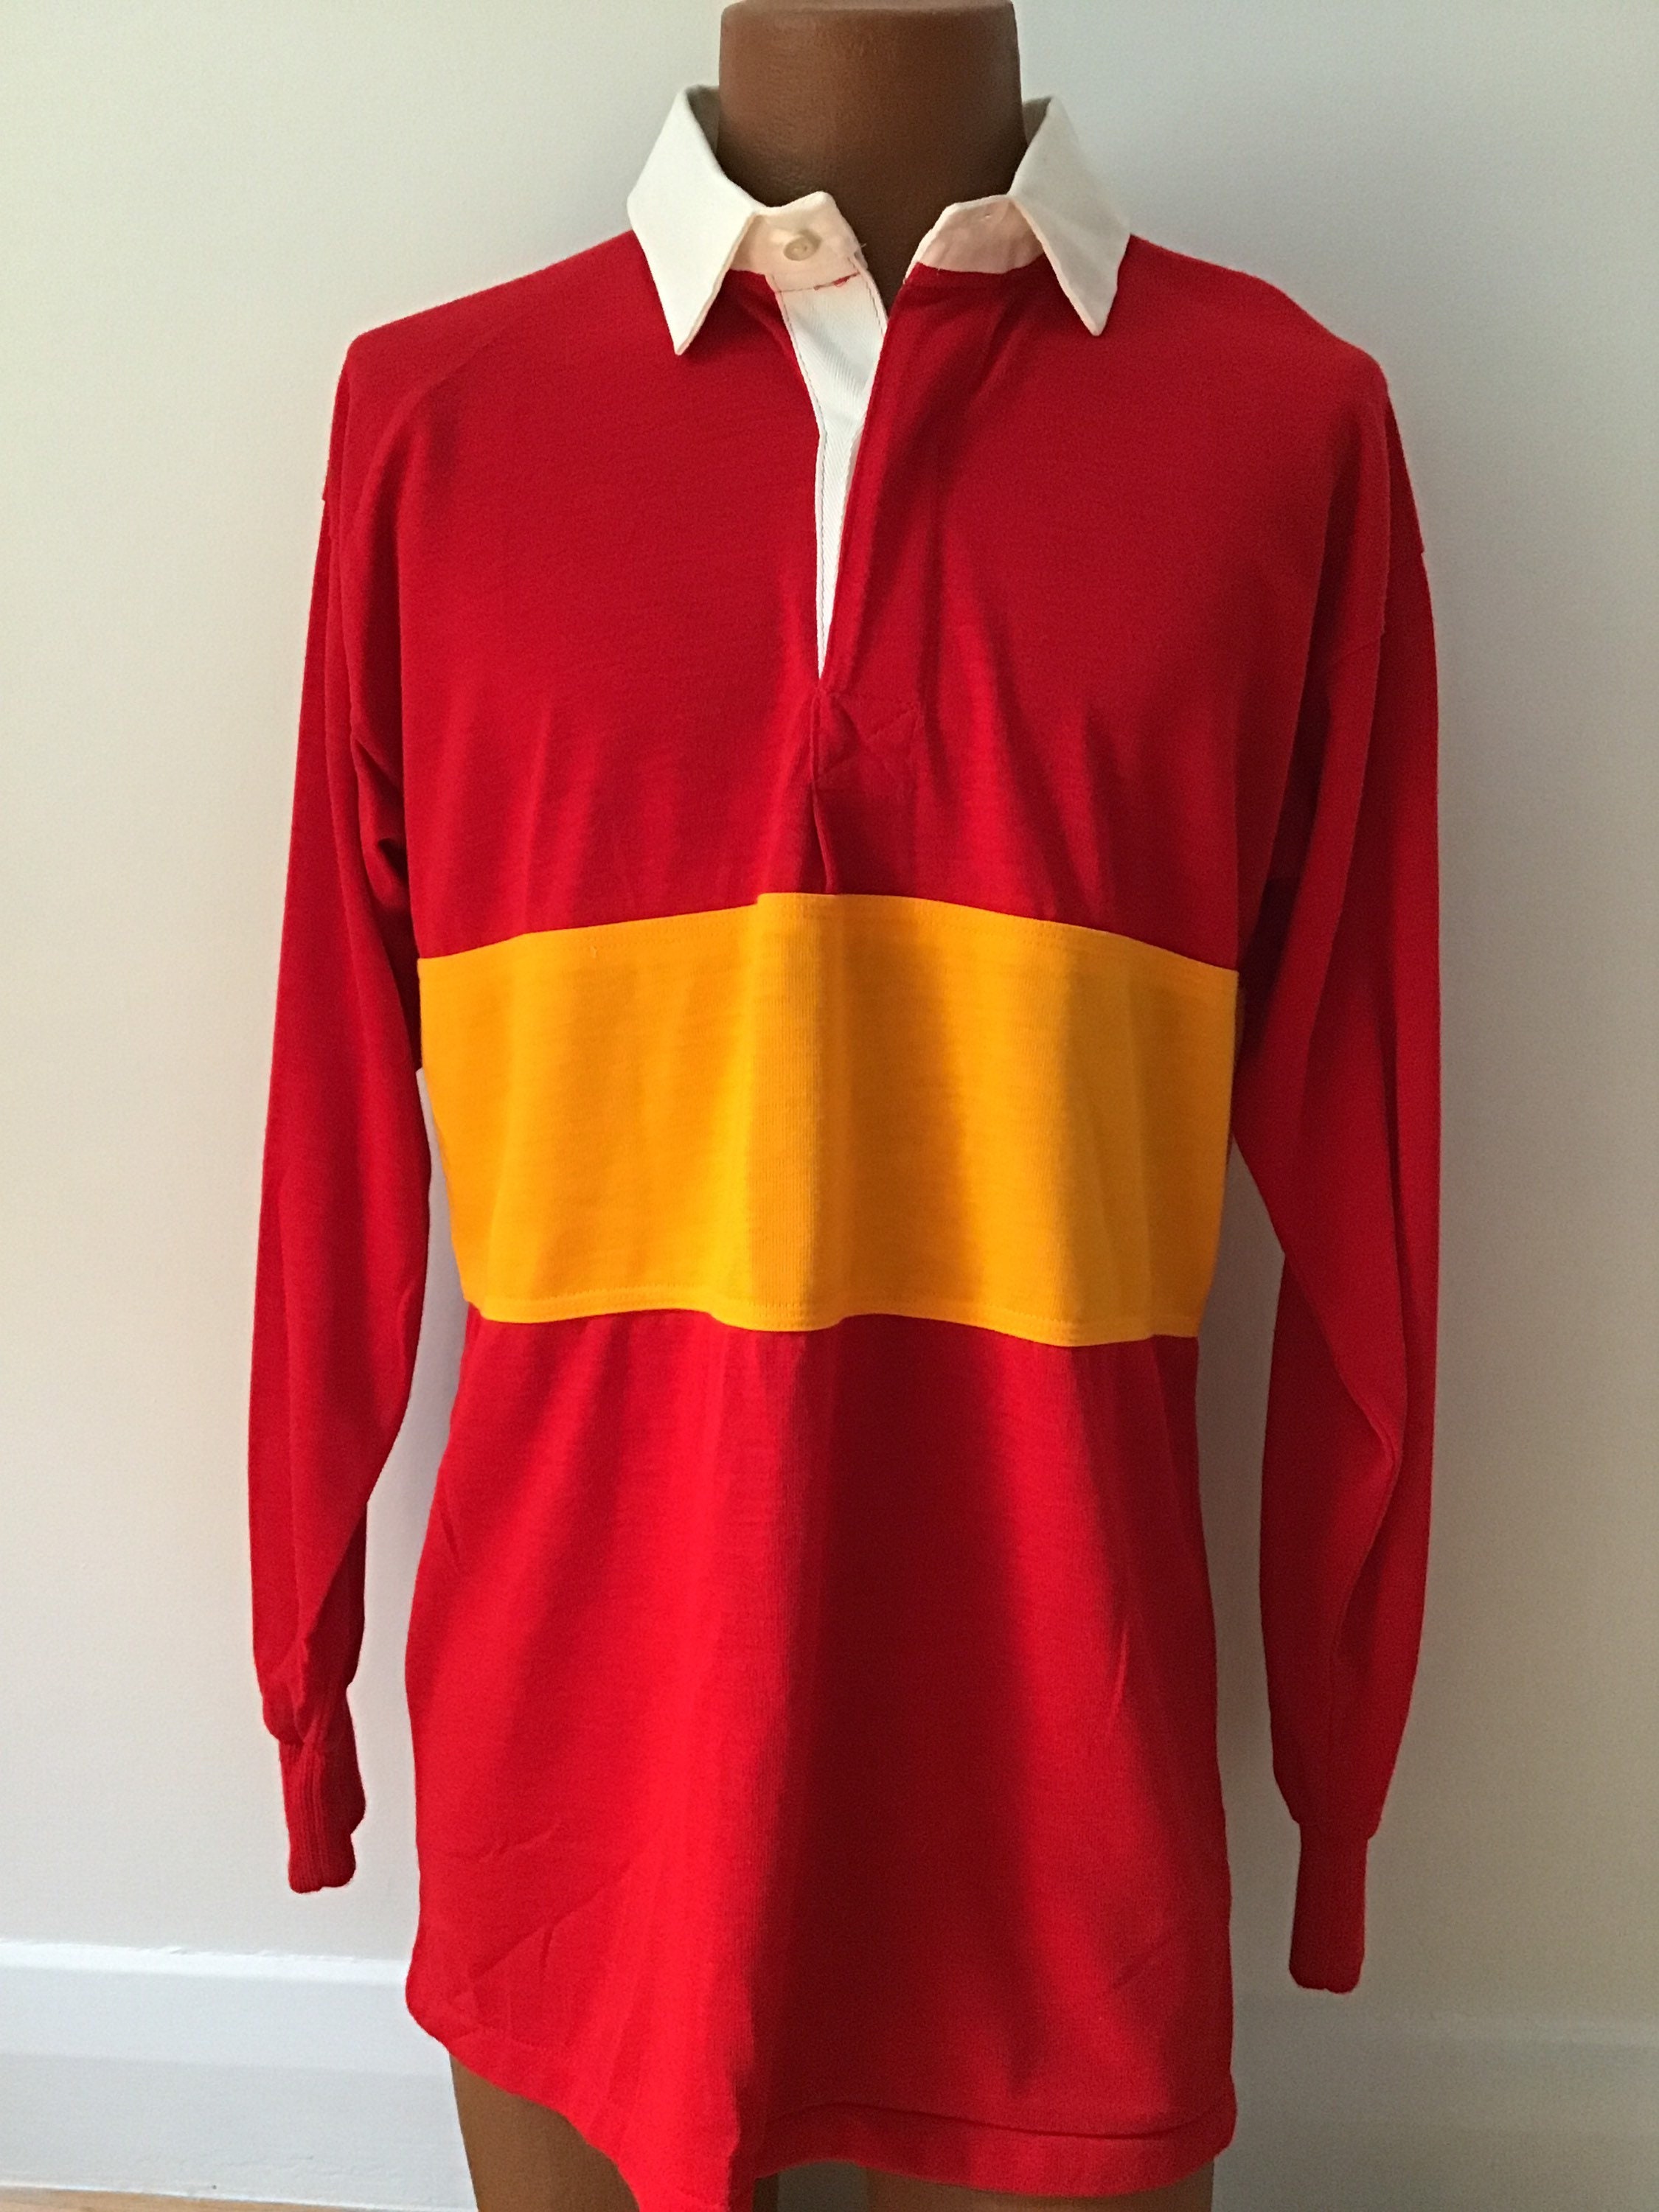 80s Mens Vintage Rugby Shirt. England Gymphlex - Etsy